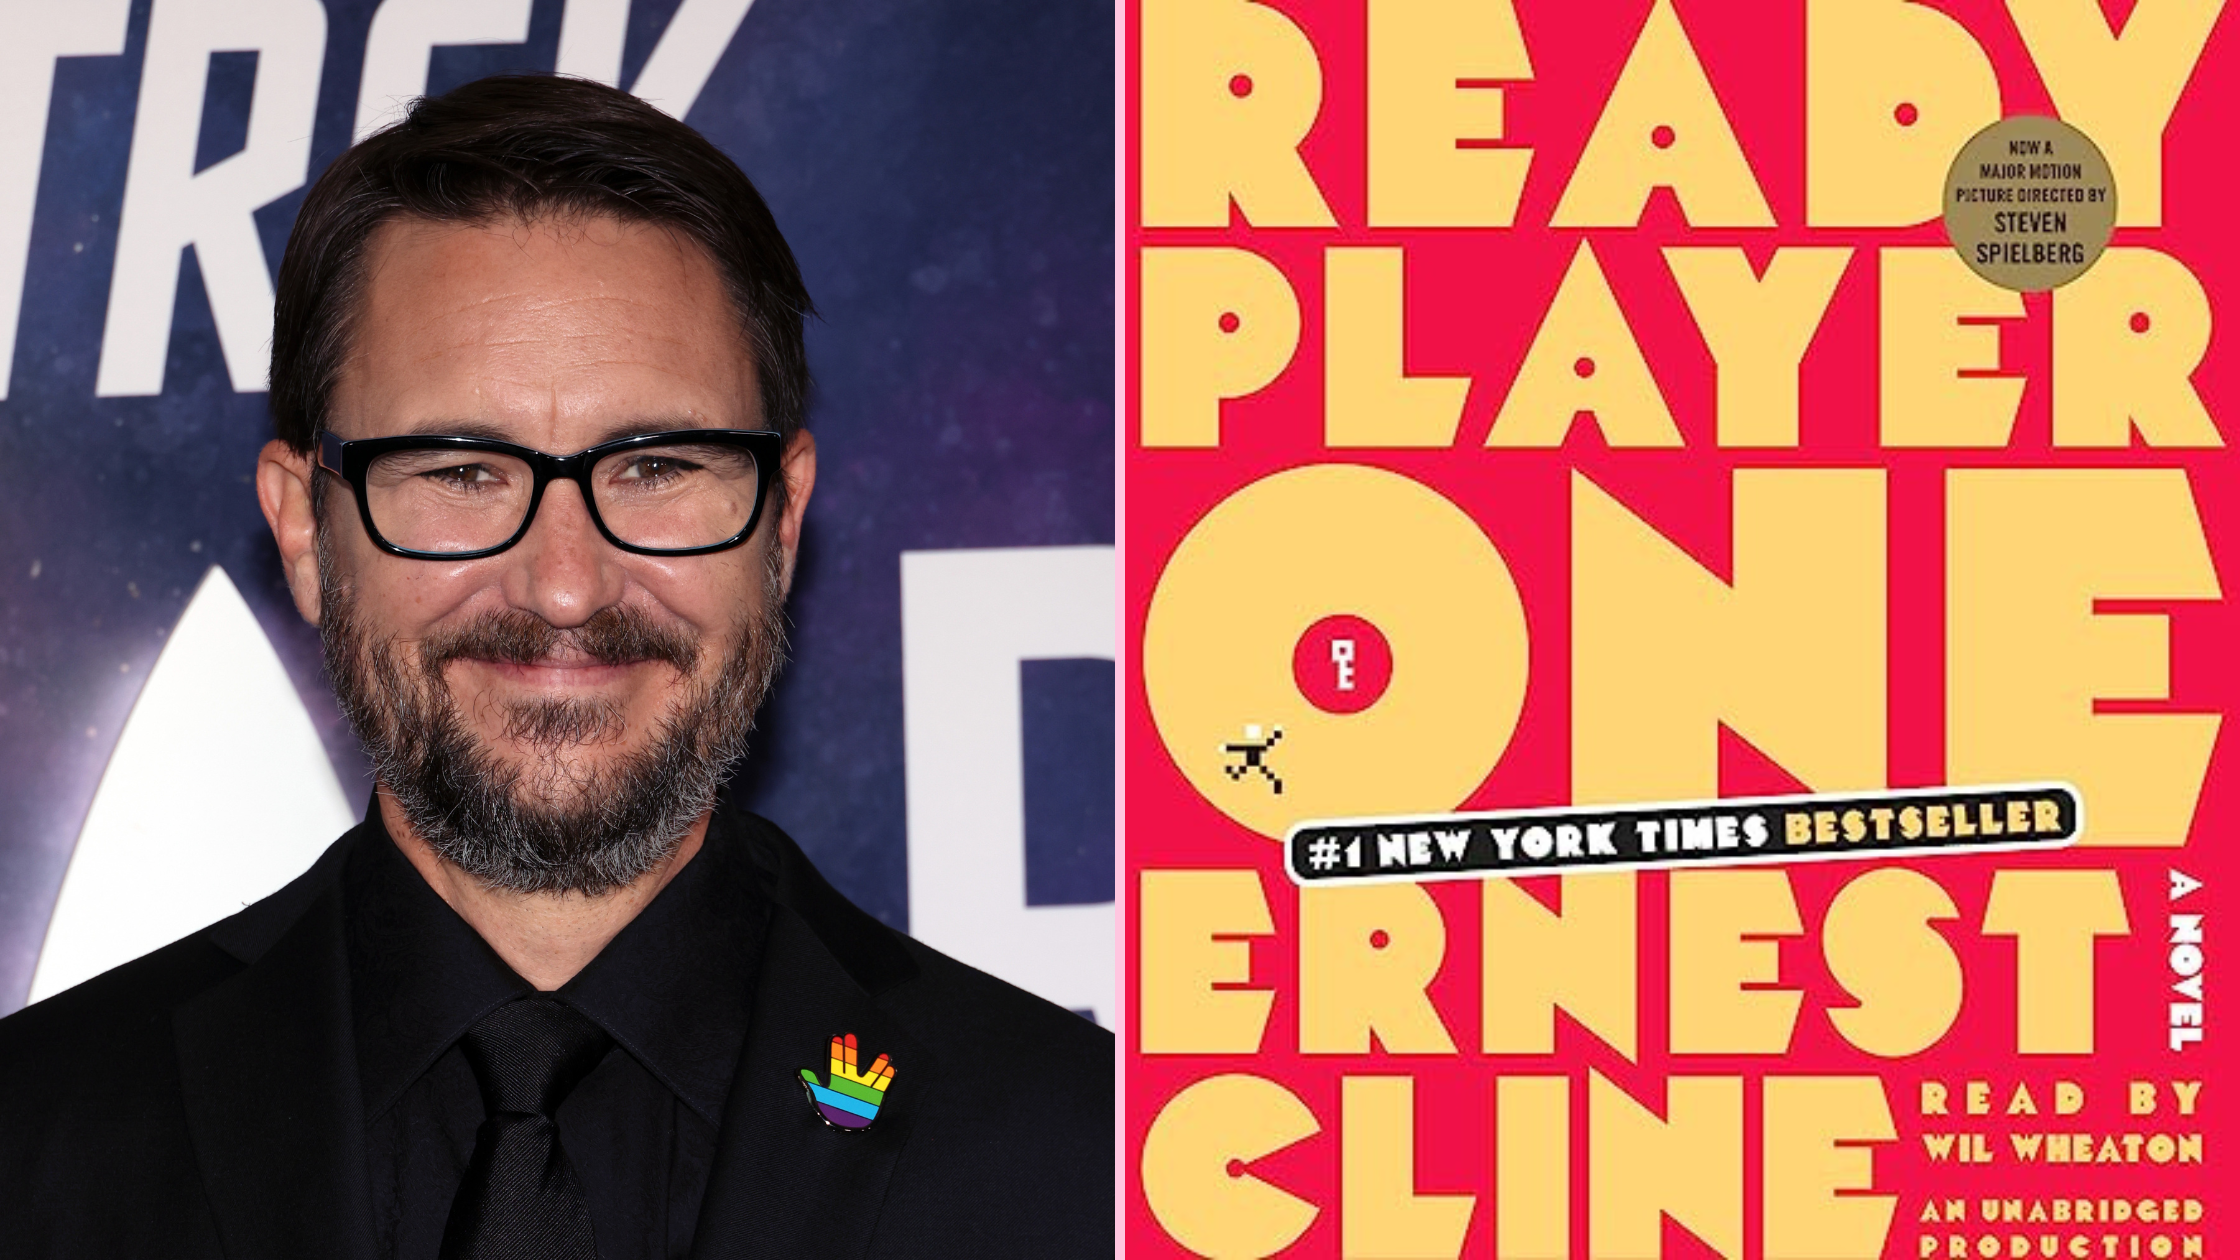 I am a New York Times Bestselling Author – WIL WHEATON dot NET